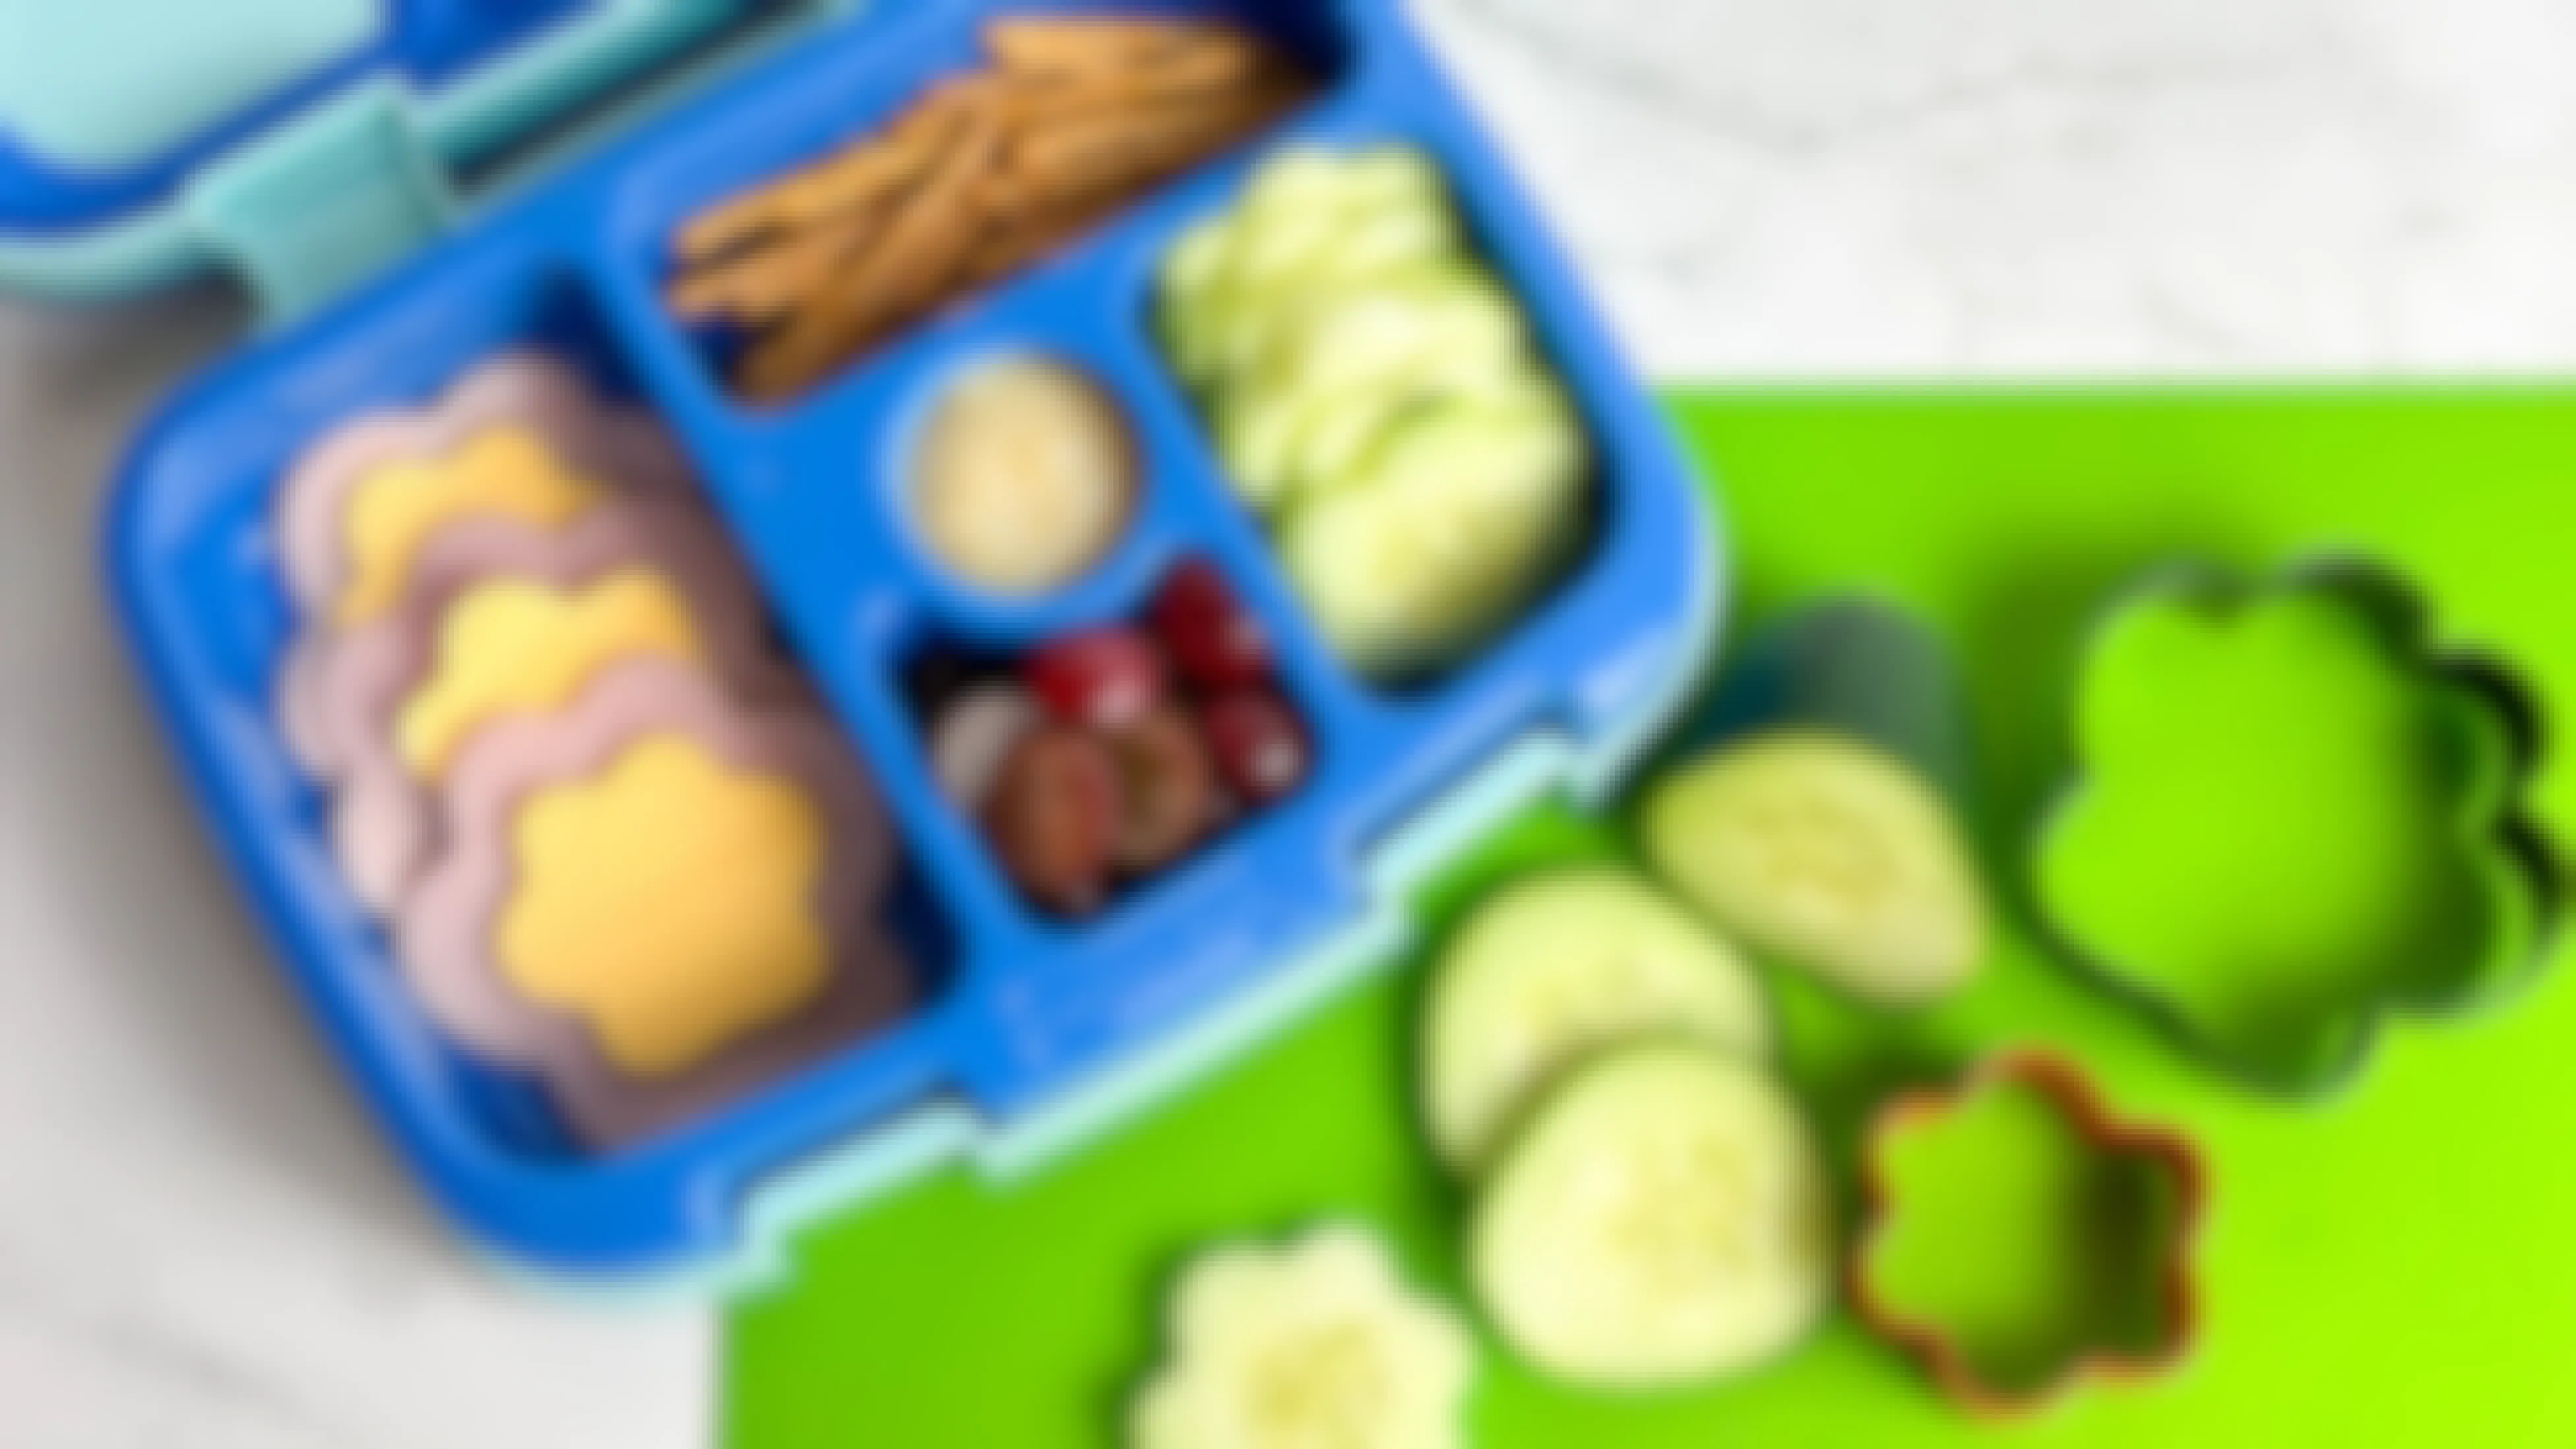 Cheap Bento Box Lunch Ideas Your Kids Will Love (5 Days of Lunches = $9.05 Total!)